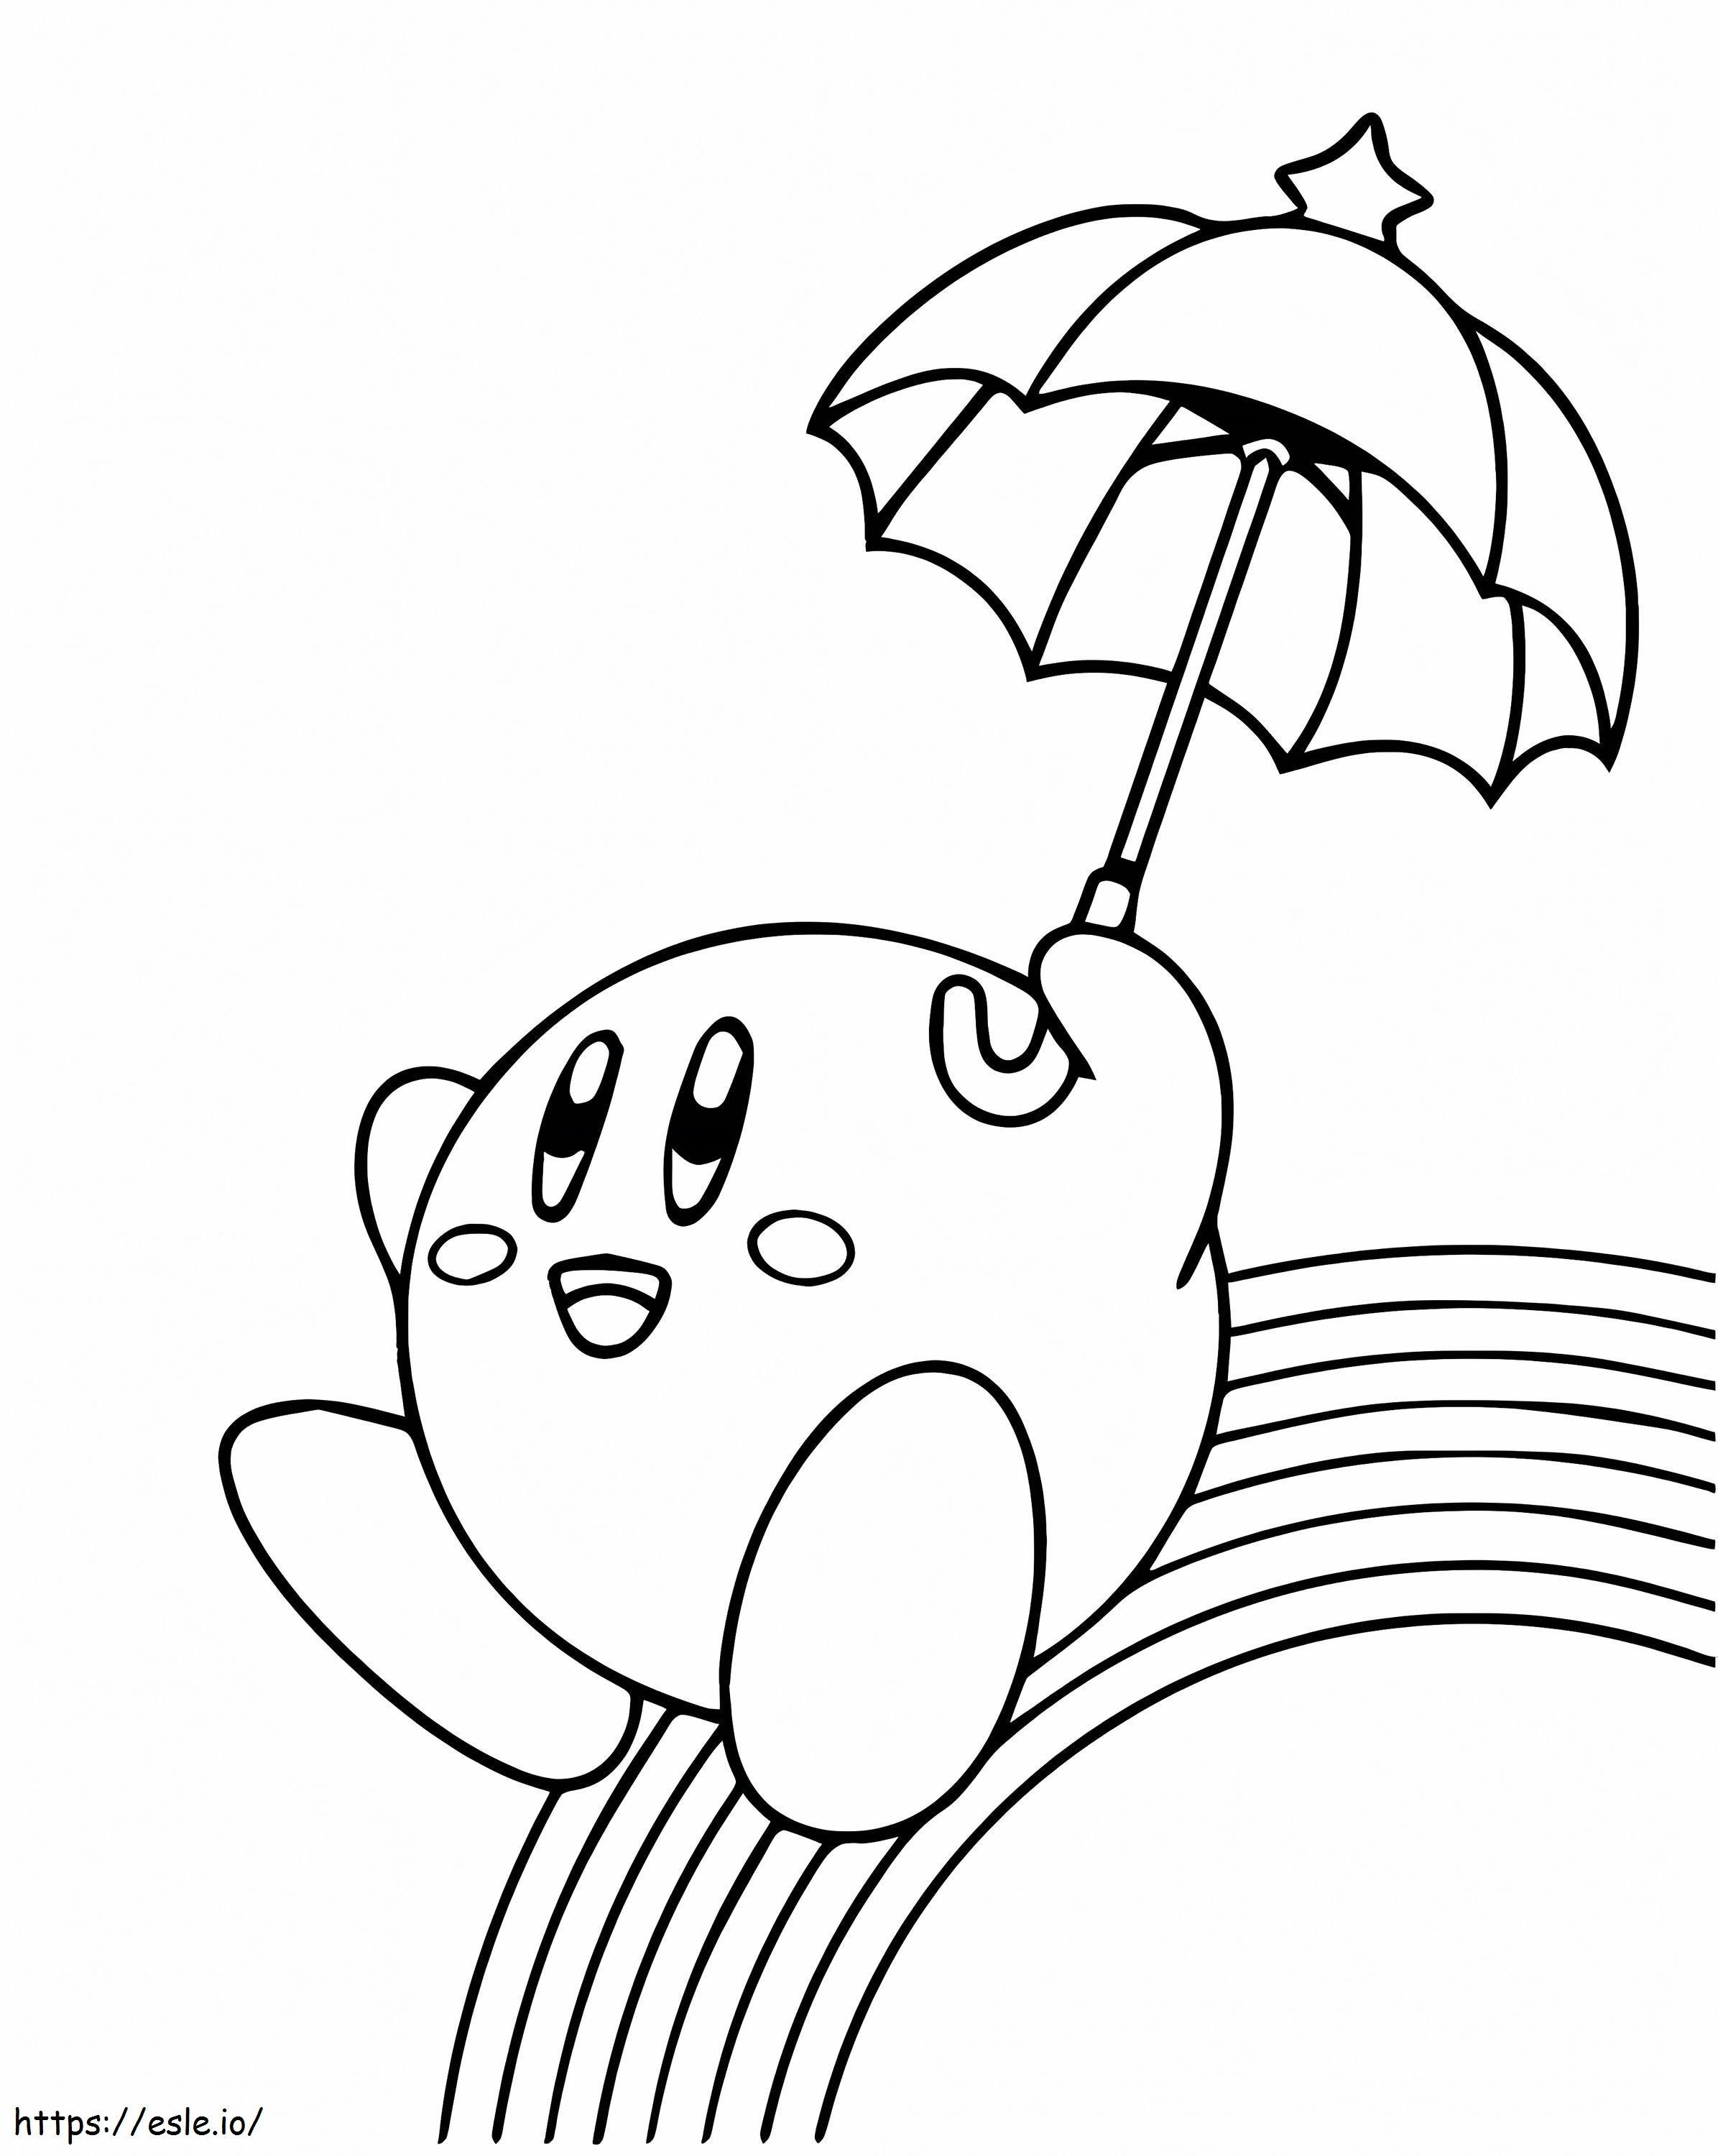 Kirby Holding Rainbow Umbrella coloring page